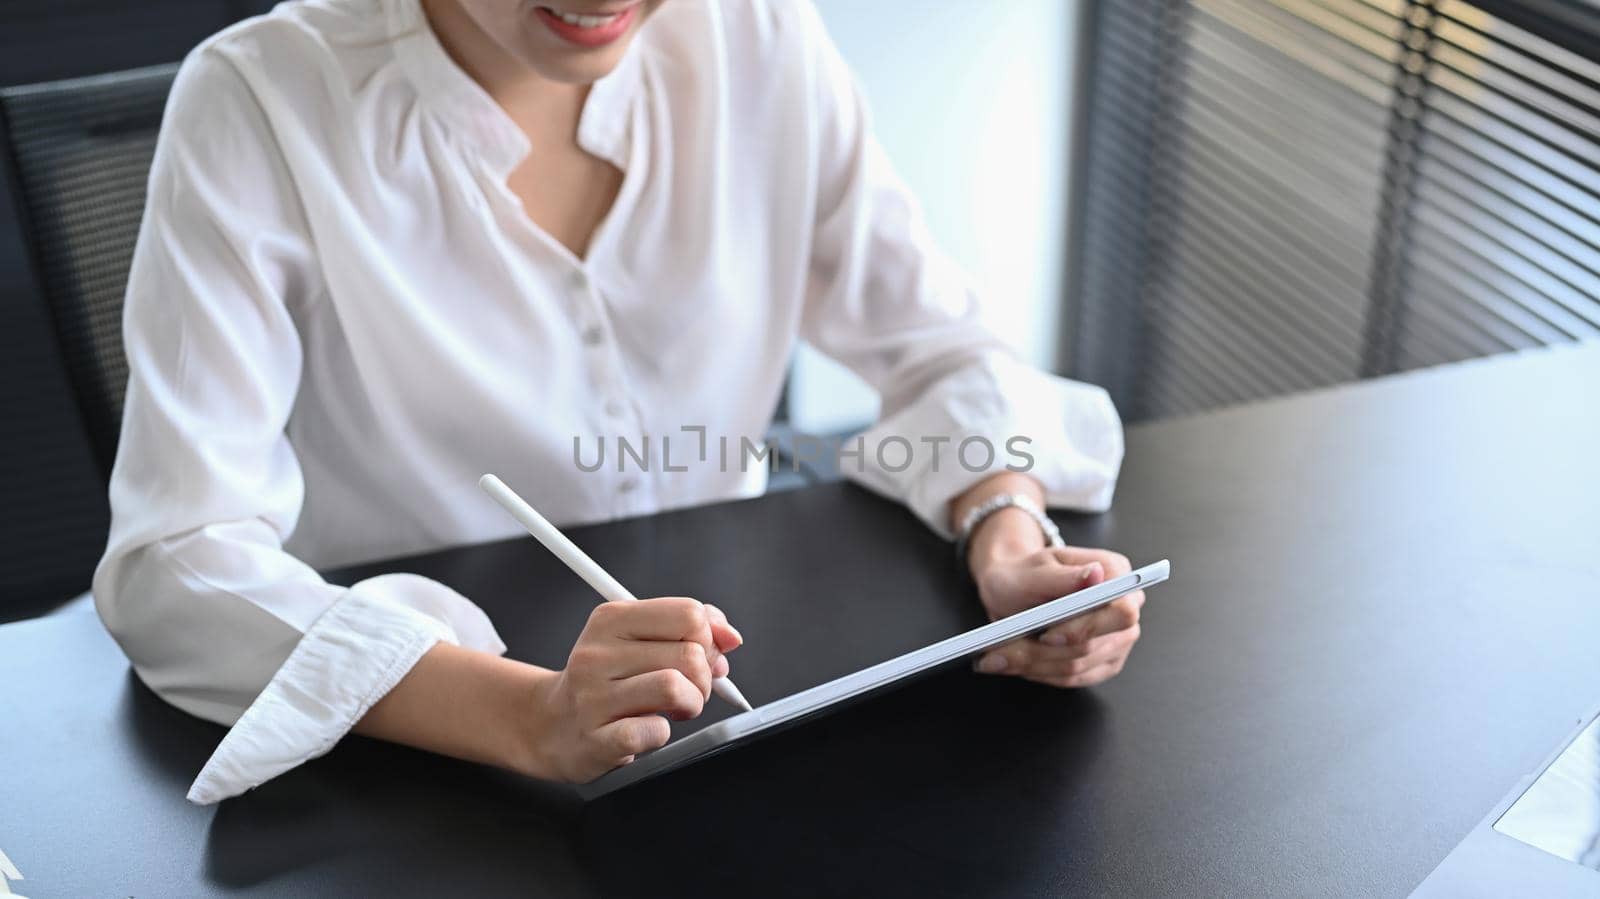 Professional businesswoman using digital tablet and preparing annual financial report at office desk.